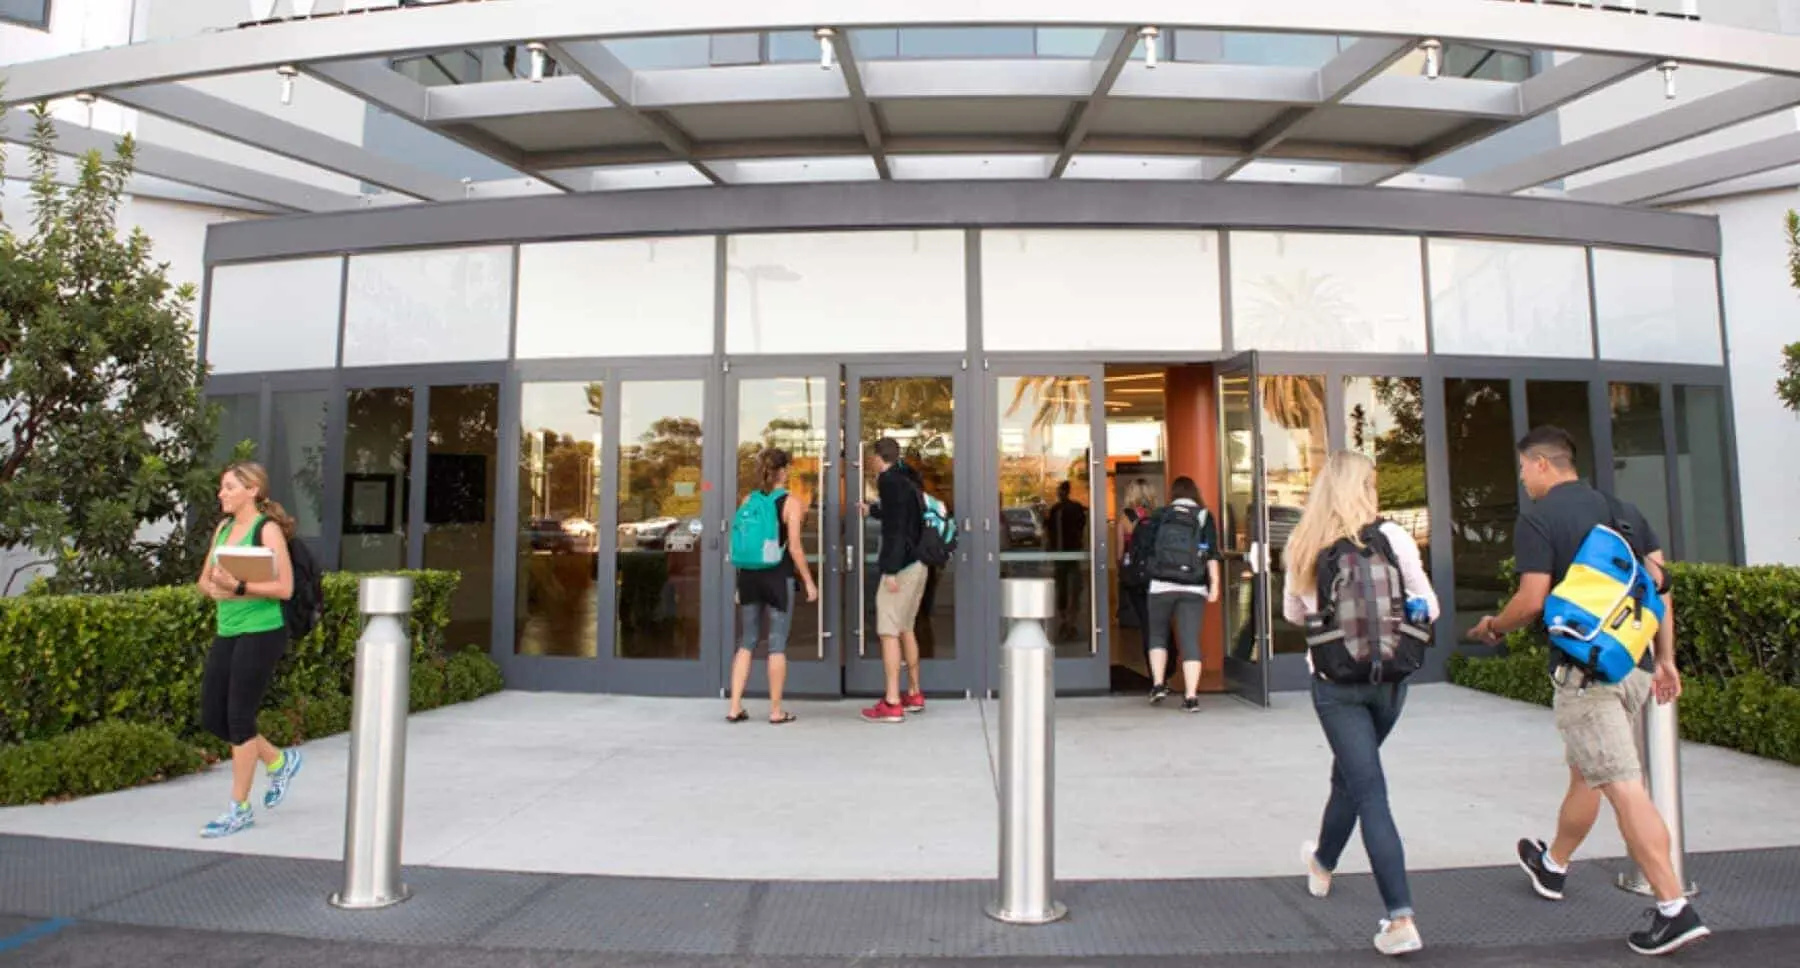 West Coast University has over a century of experience in education, six campuses across the country, and offers online programs tailored for working professionals, focusing on nursing, healthcare, and business fields.